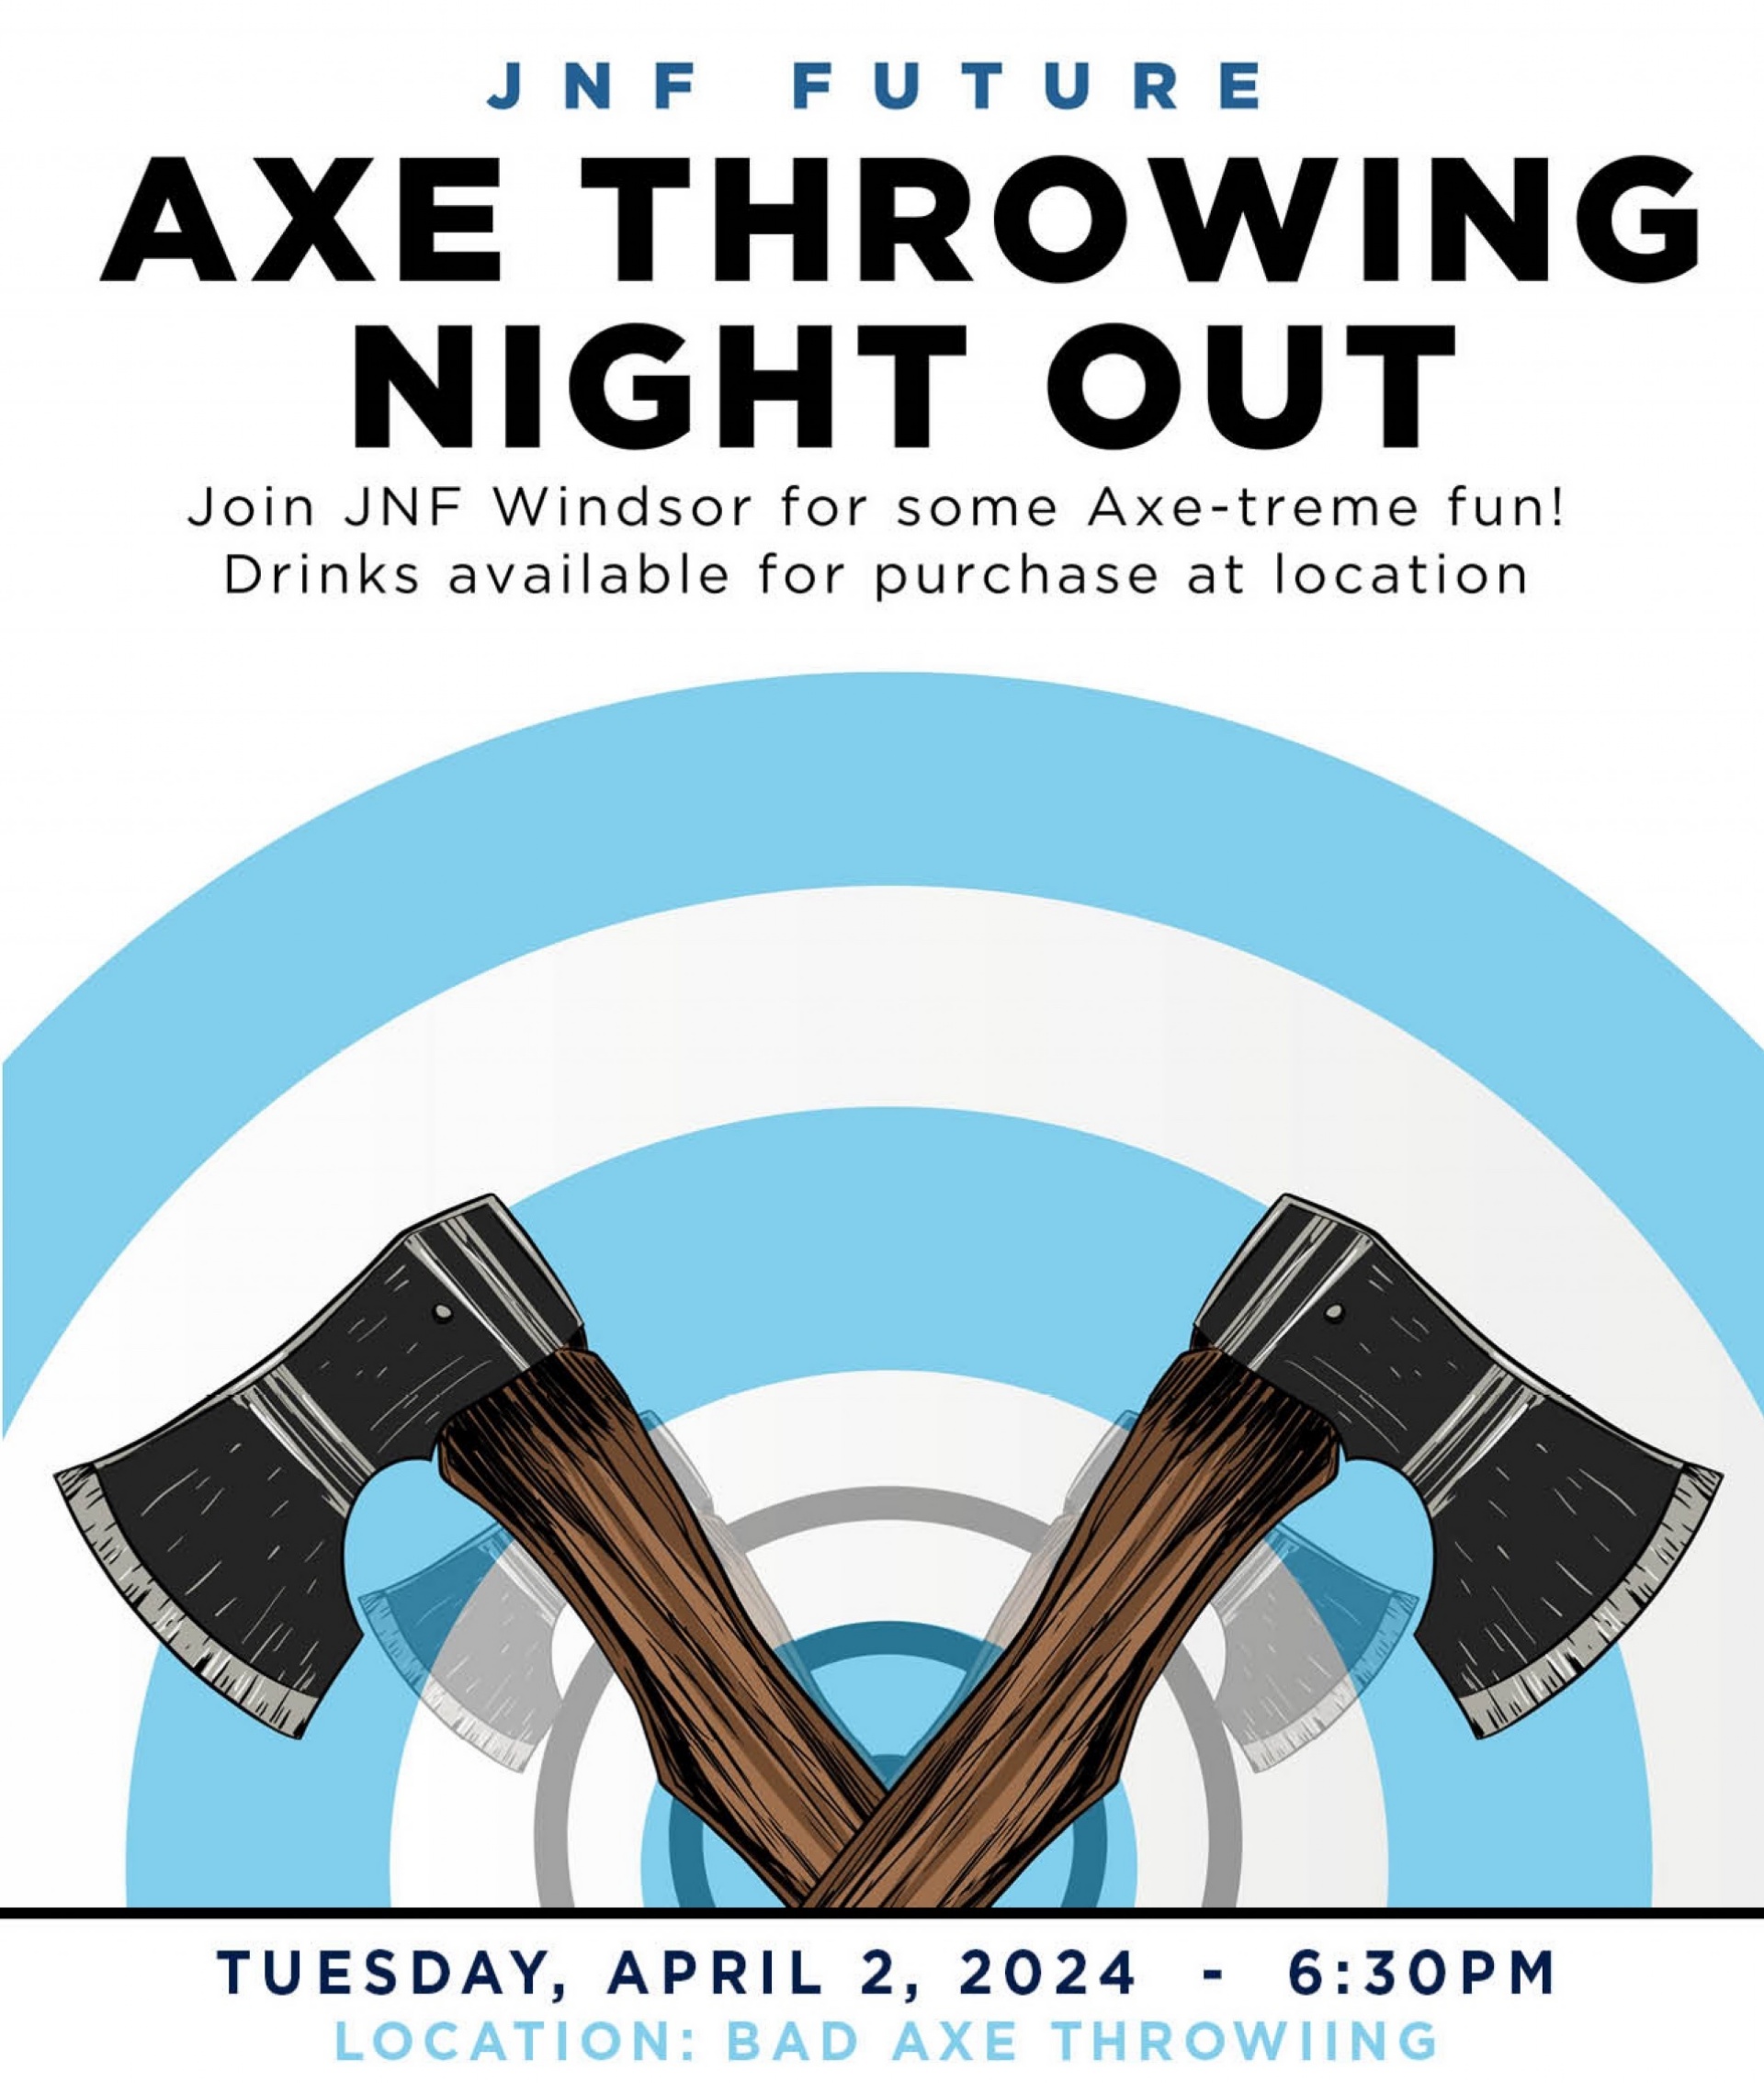 Axe Throwing Night Out